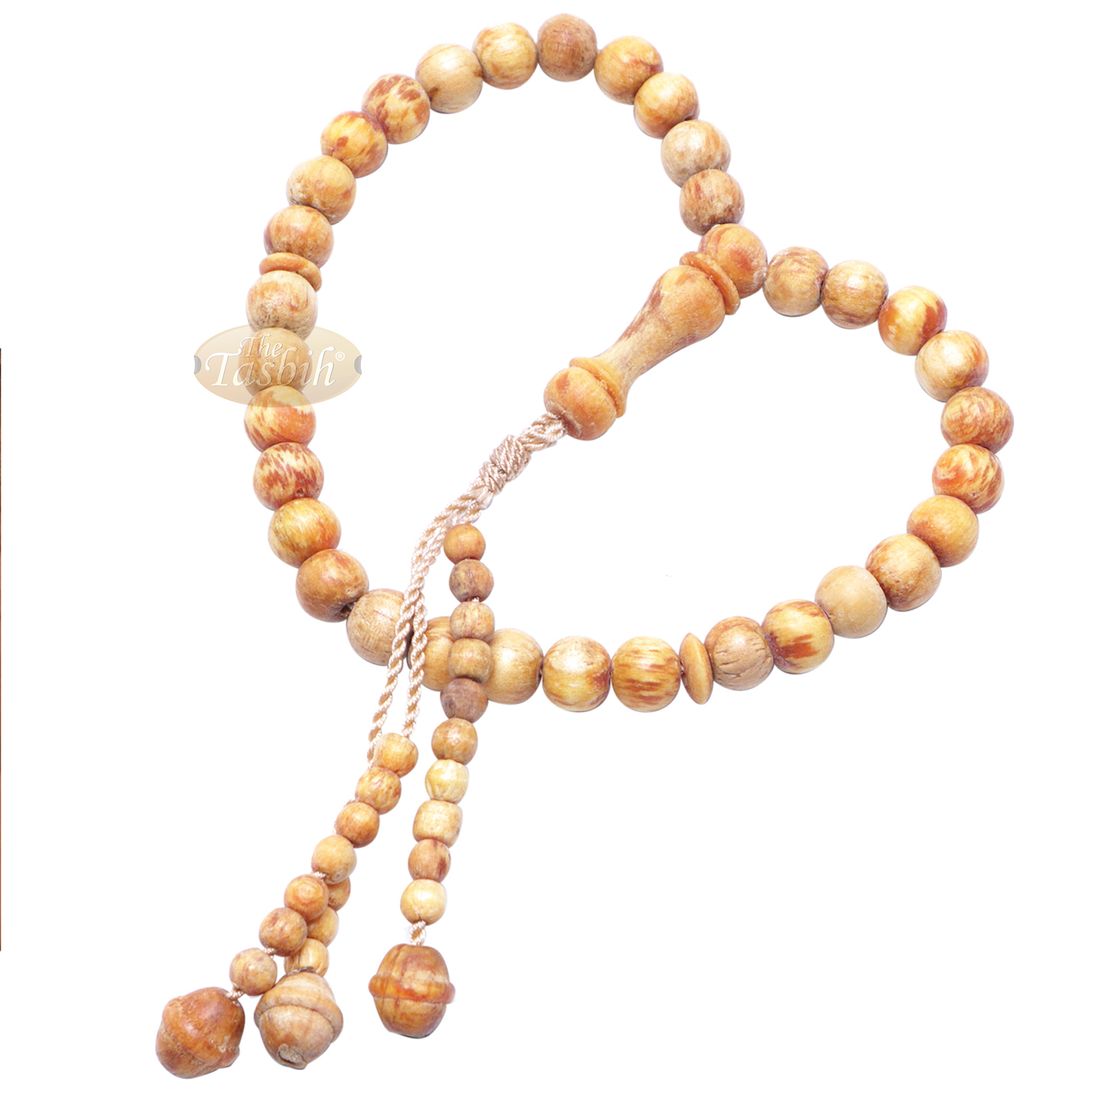 Scented 33-bead Pine Pitch Wood Prayer Beads Rosary 8mm Wood Tasbih